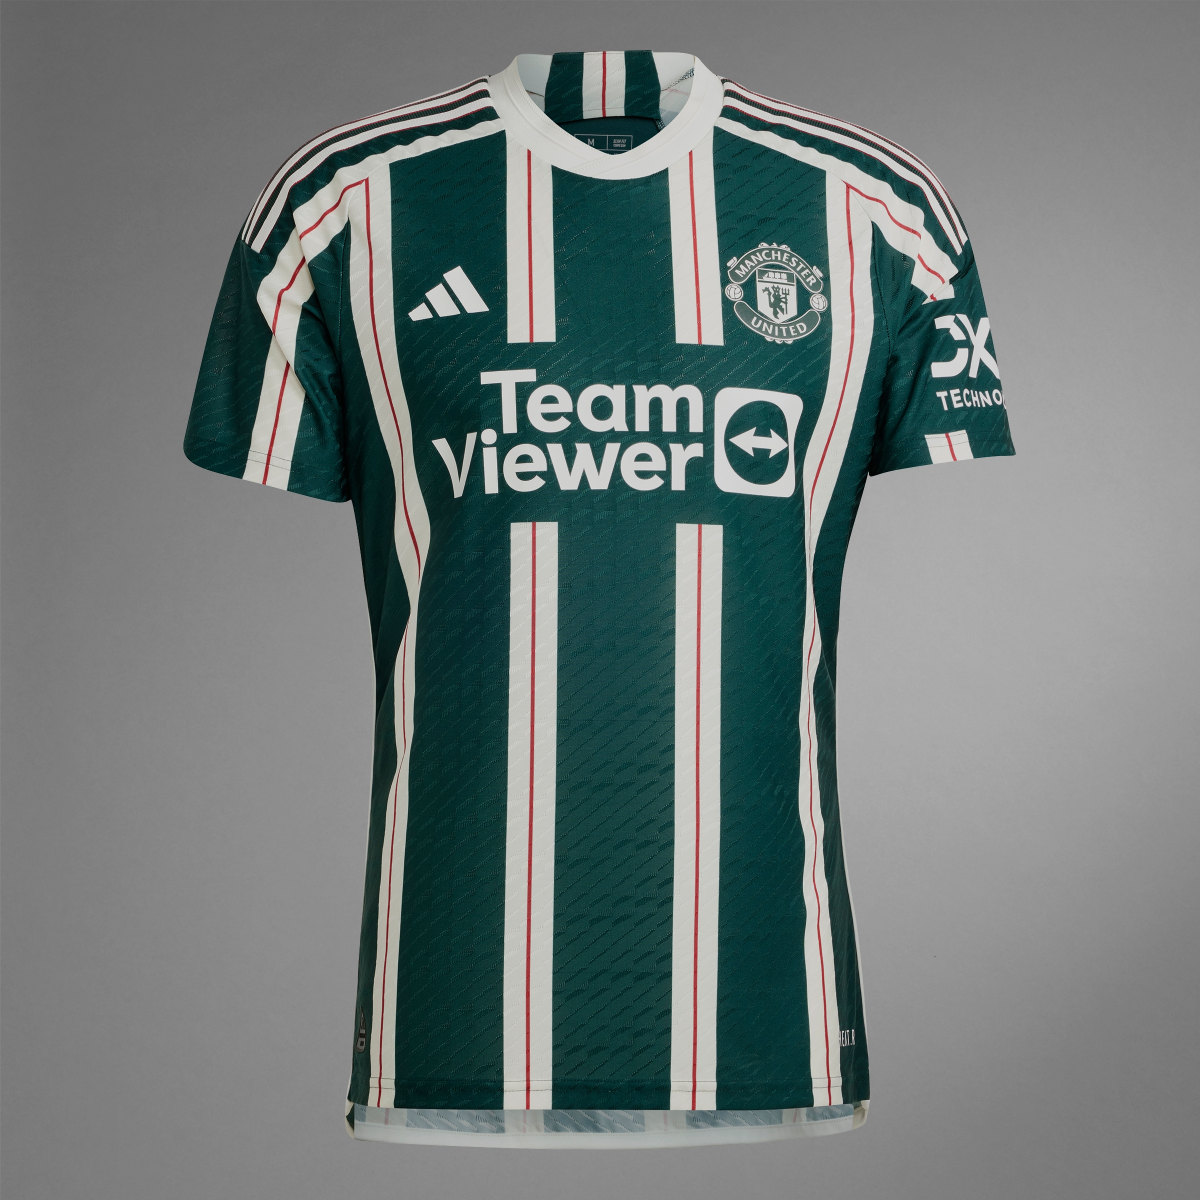 Adidas Jersey Visitante Manchester United 23/24 Authentic. 10